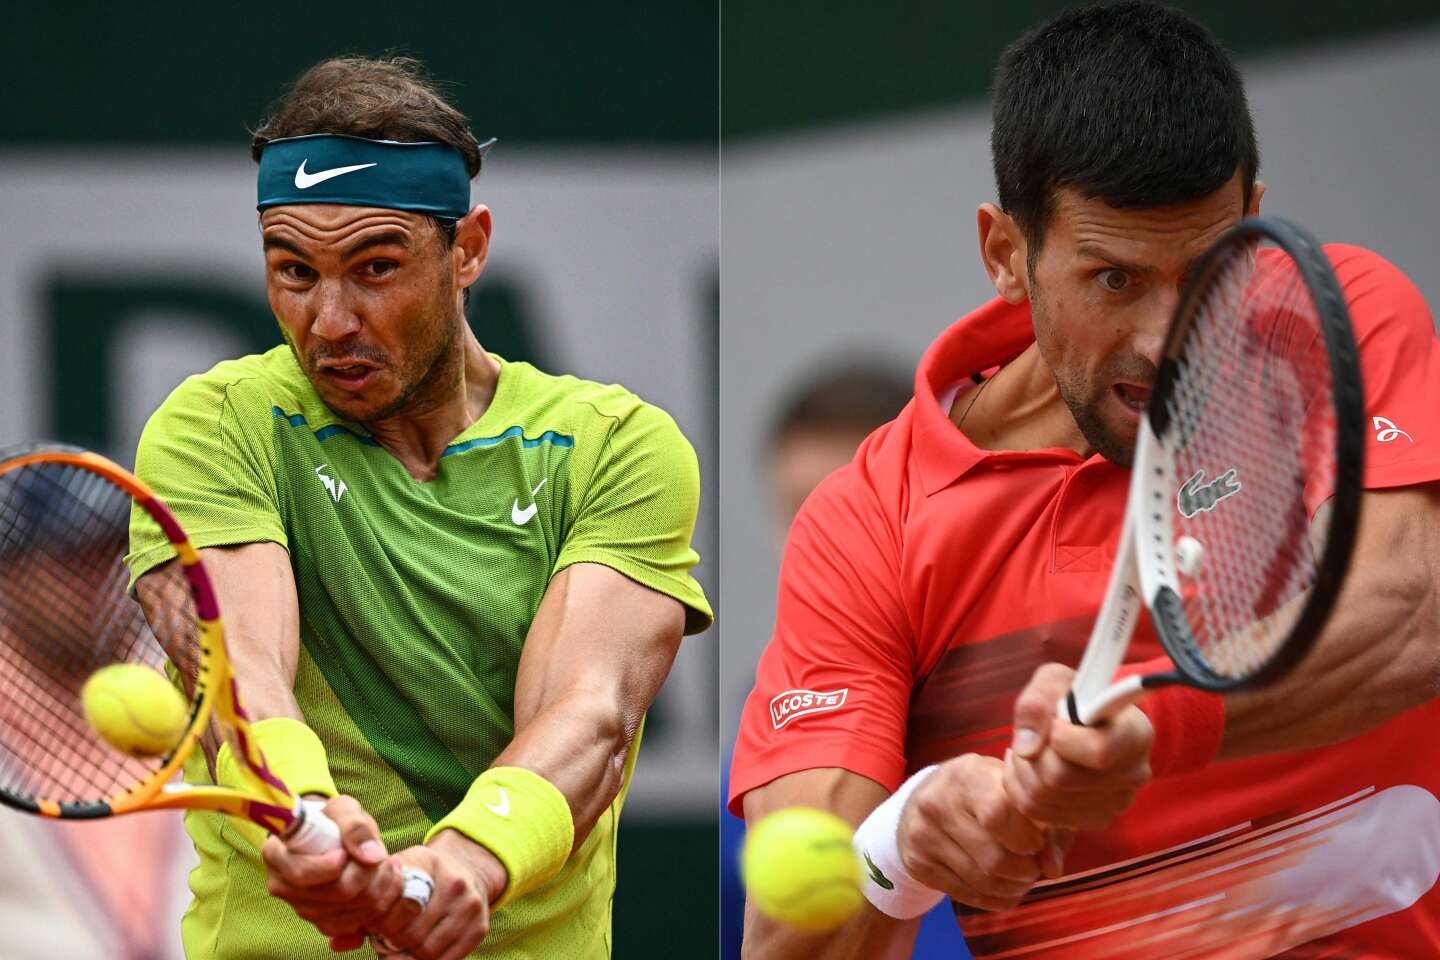 French Open Amazon beats public television to broadcast Nadal-Djokovic in France